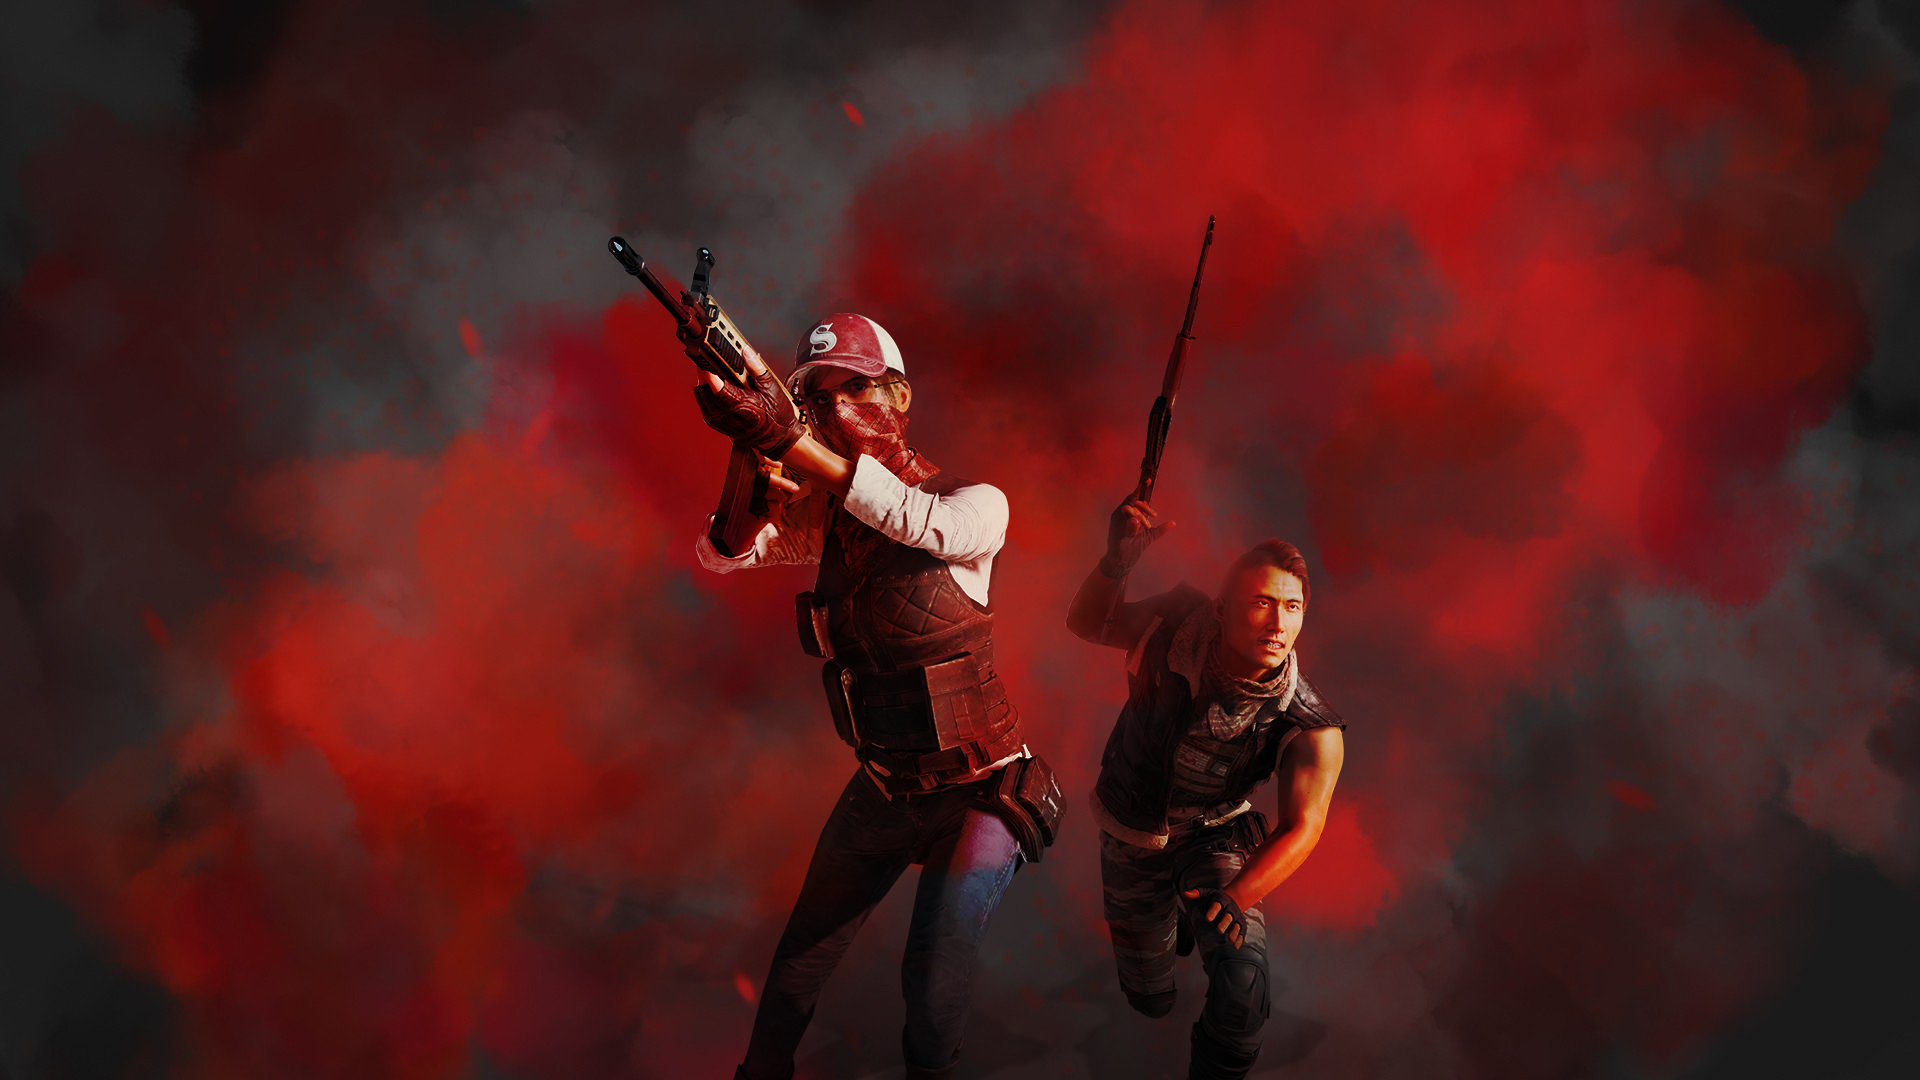 PlayerUnknowns Battlegrounds Wallpapers Pictures Images